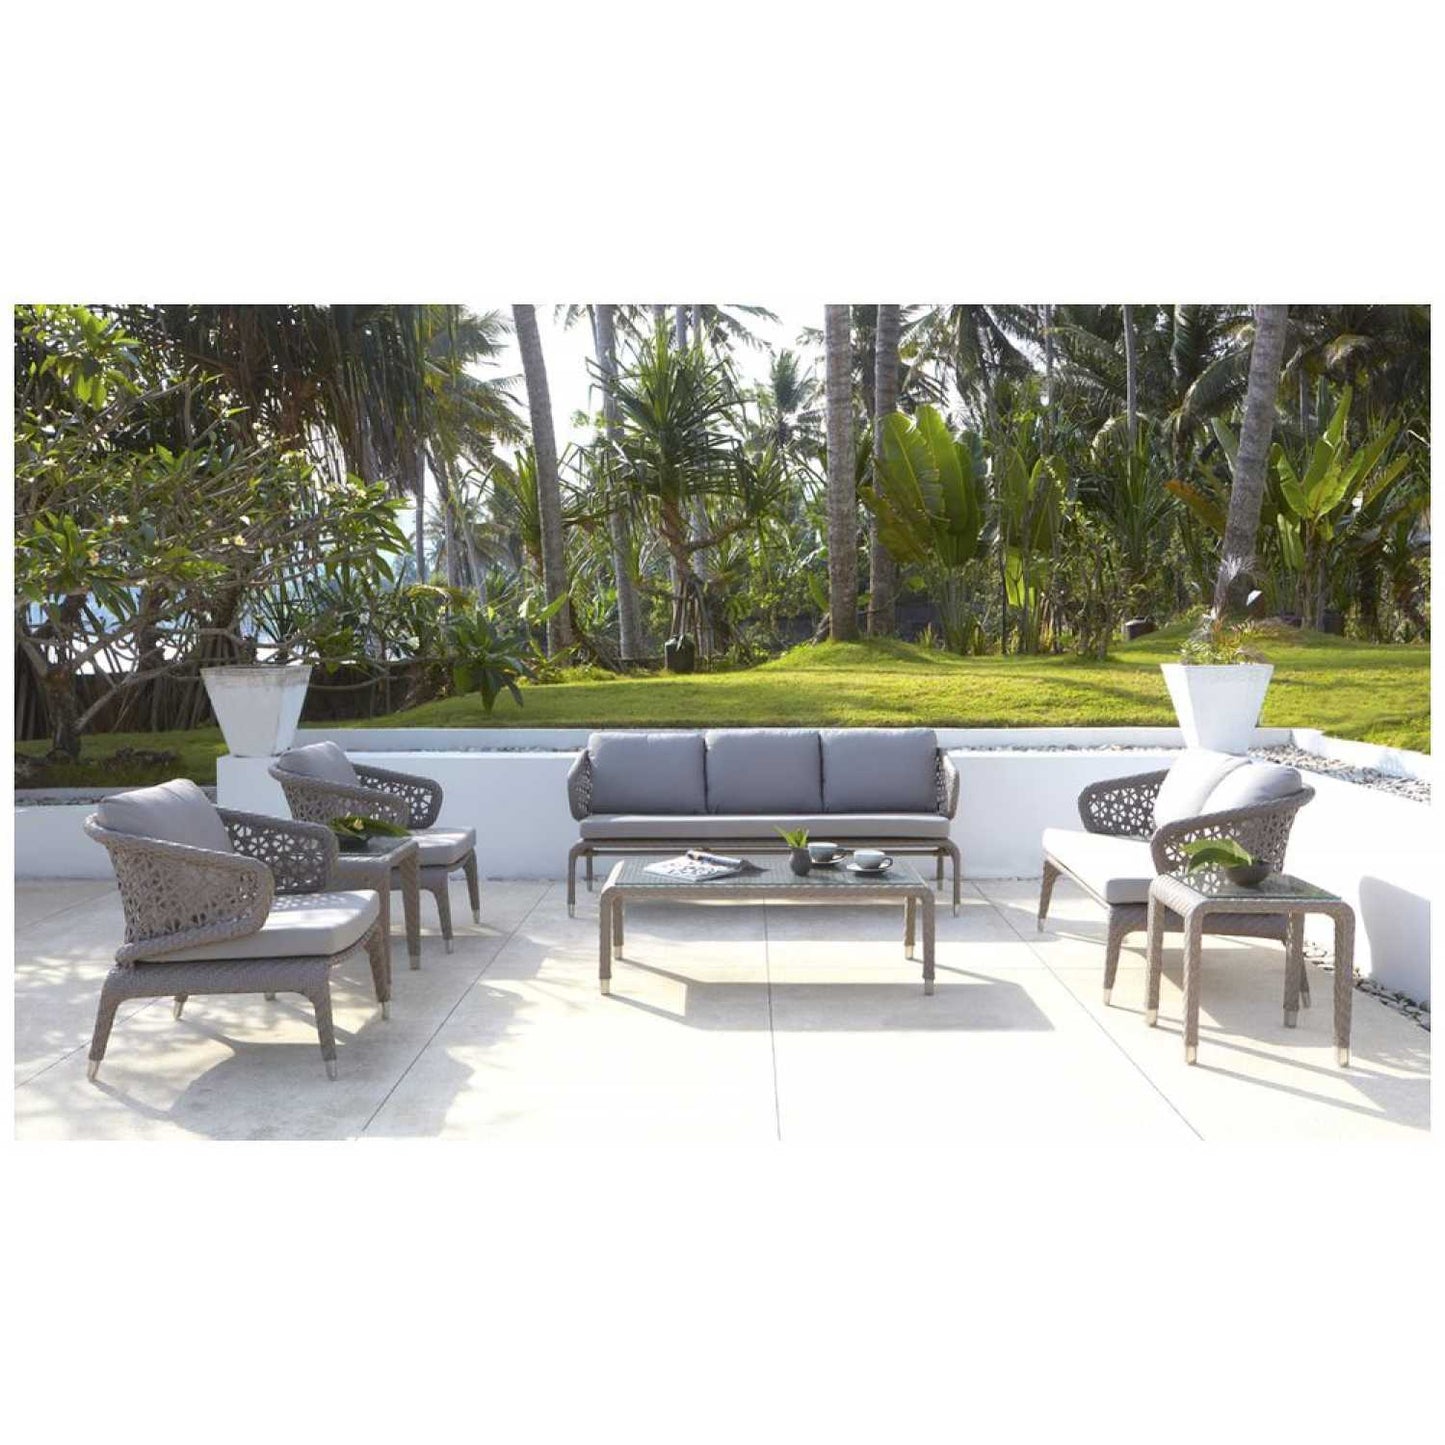 Journey Silver Walnut Arm Chair - PadioLiving - Journey Silver Walnut Arm Chair - Outdoor Arm Chair - PadioLiving